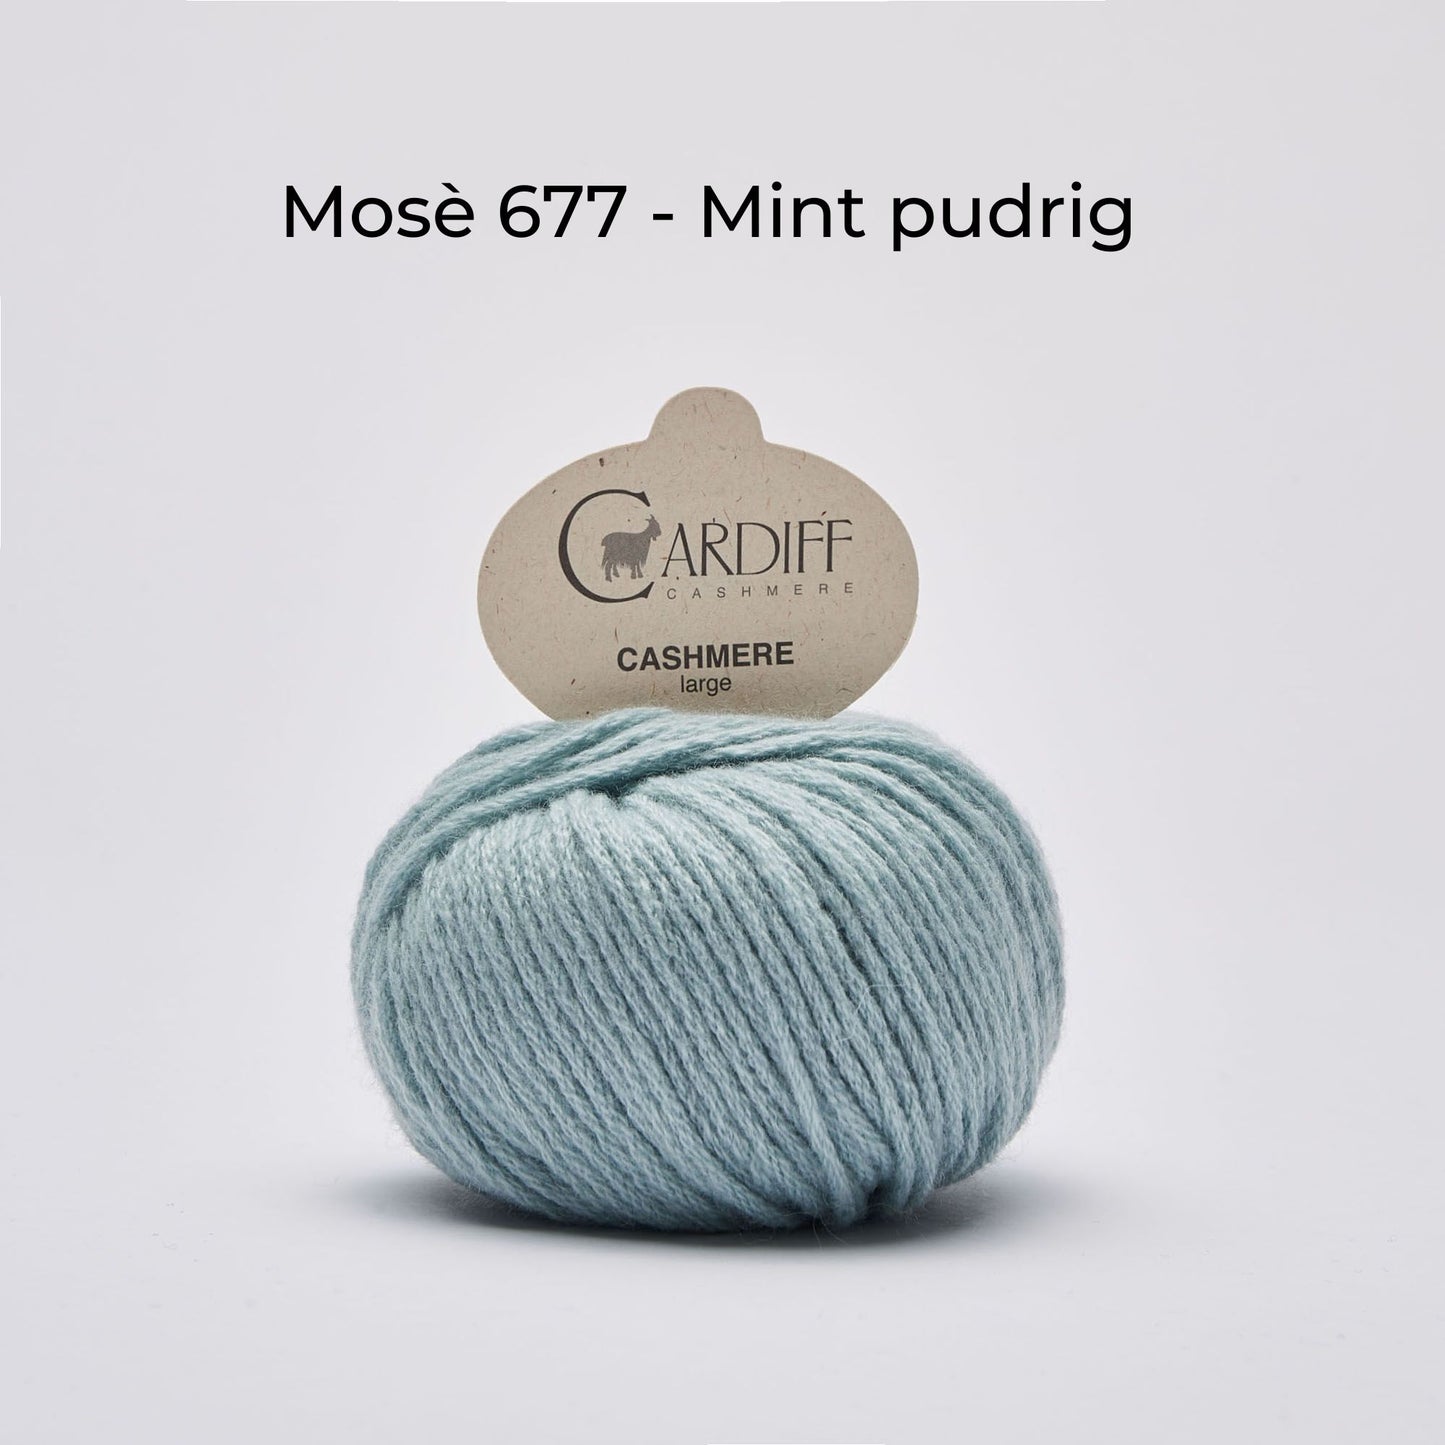 Wollknäuel, Cardiff Cashmere Classic, Farbe Mosè 677, pudriges Mint